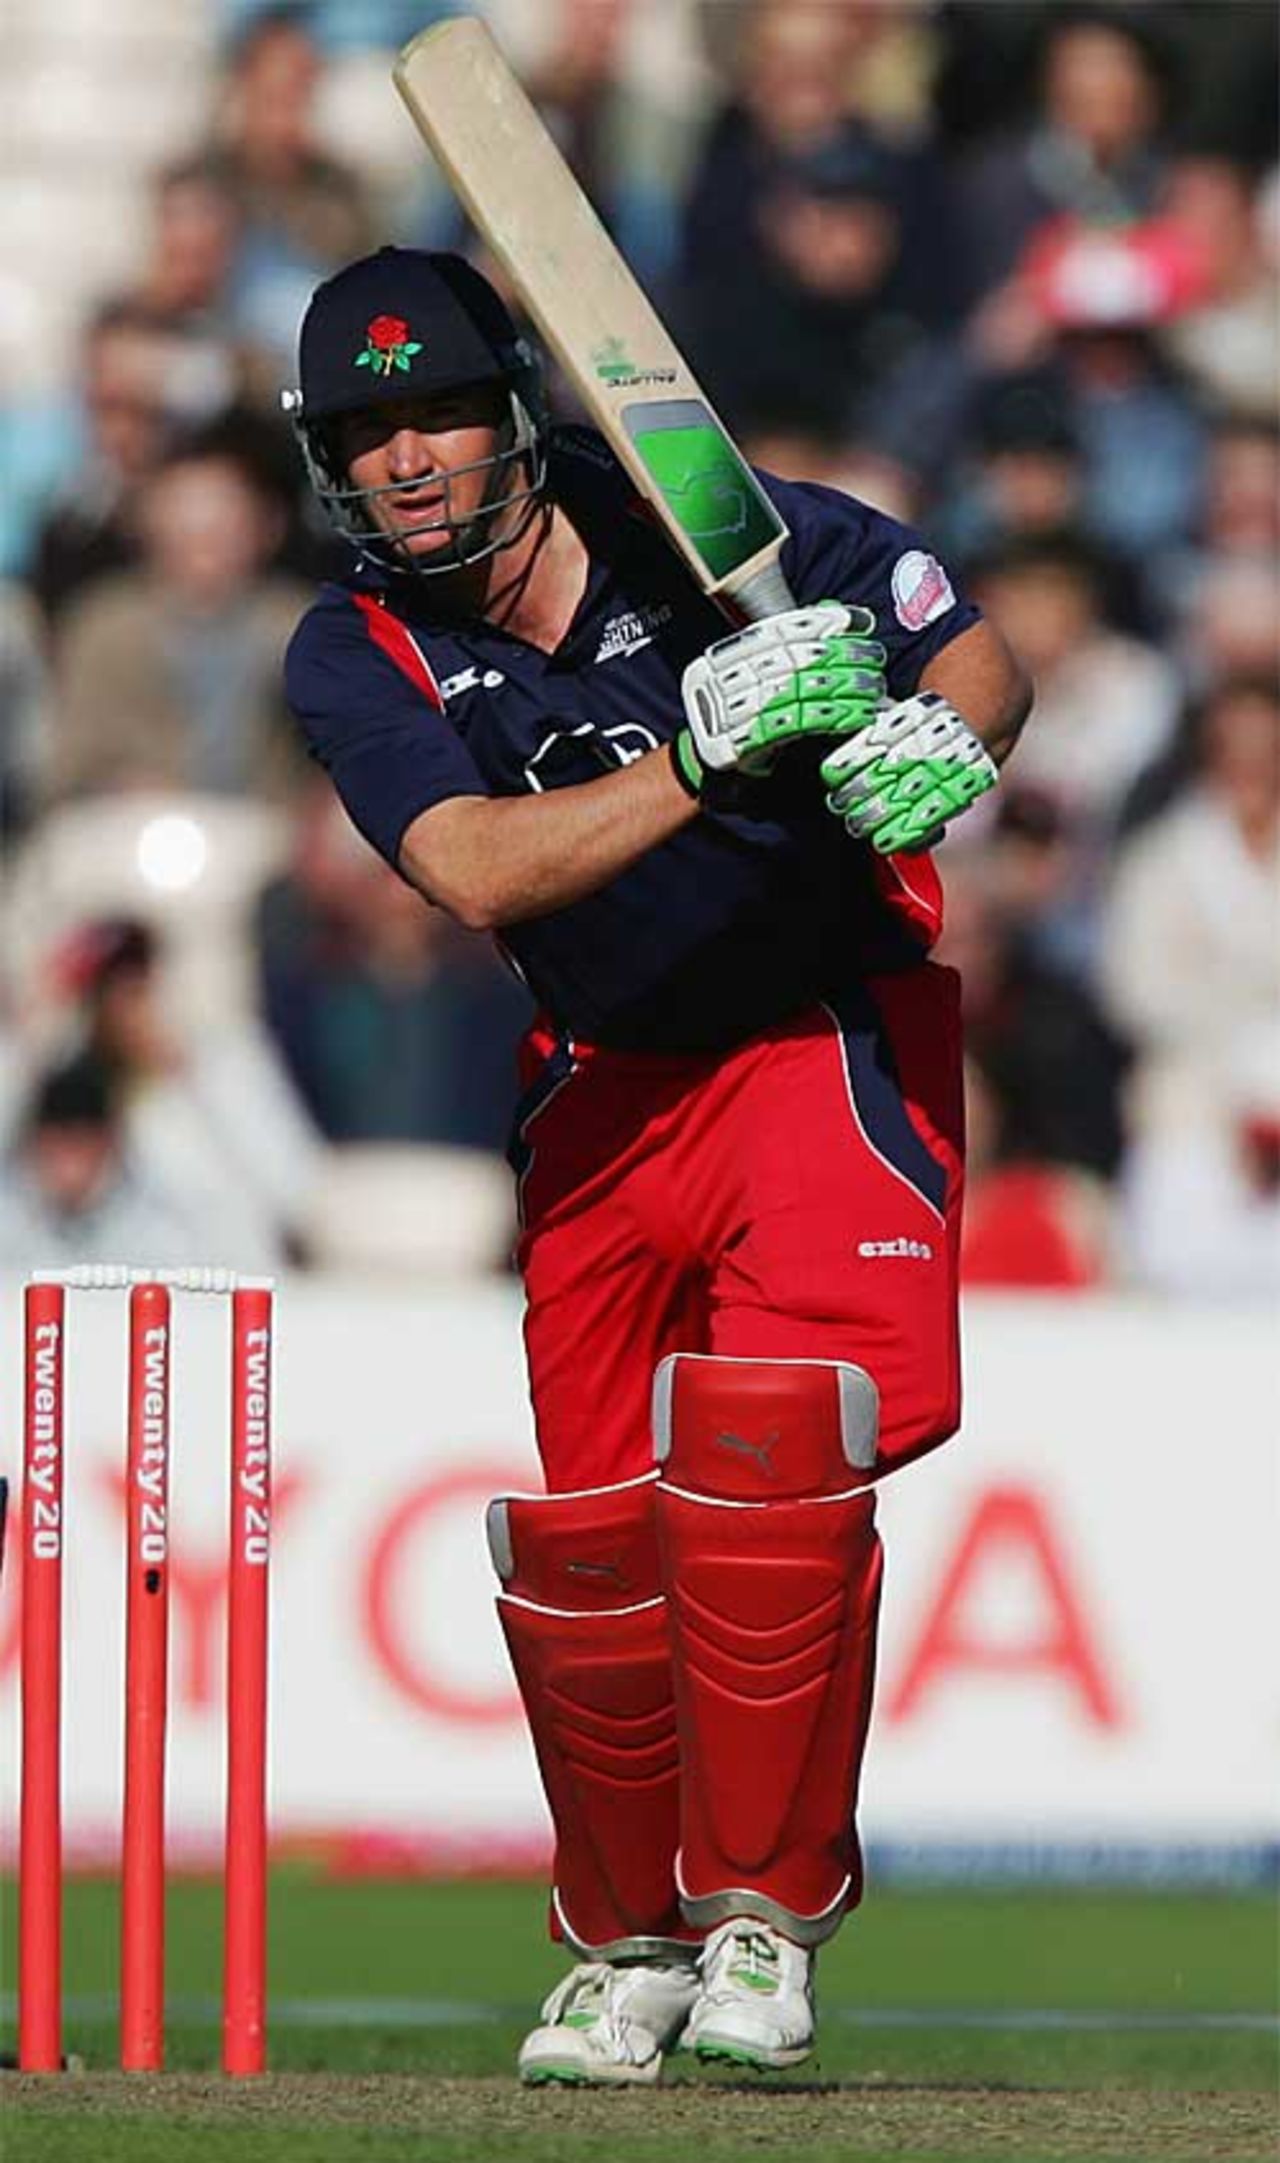 Mal Loye strikes out on his way to 38, Lancashire v Yorkshire, Twenty20 Cup, Old Trafford, June 27, 2007